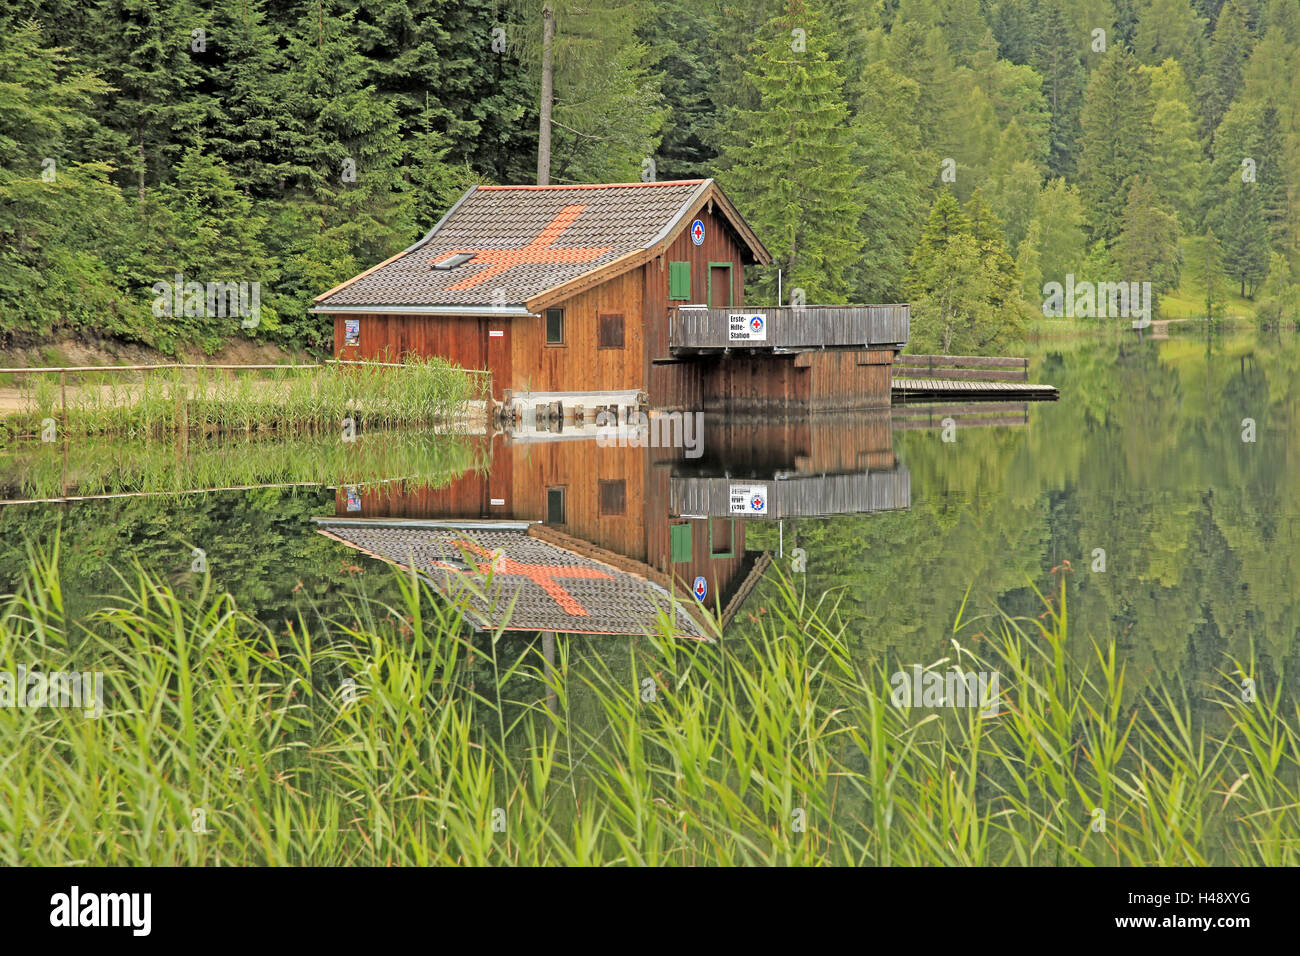 First aid station, lake, reflexion, no people, wooden hut, Stock Photo